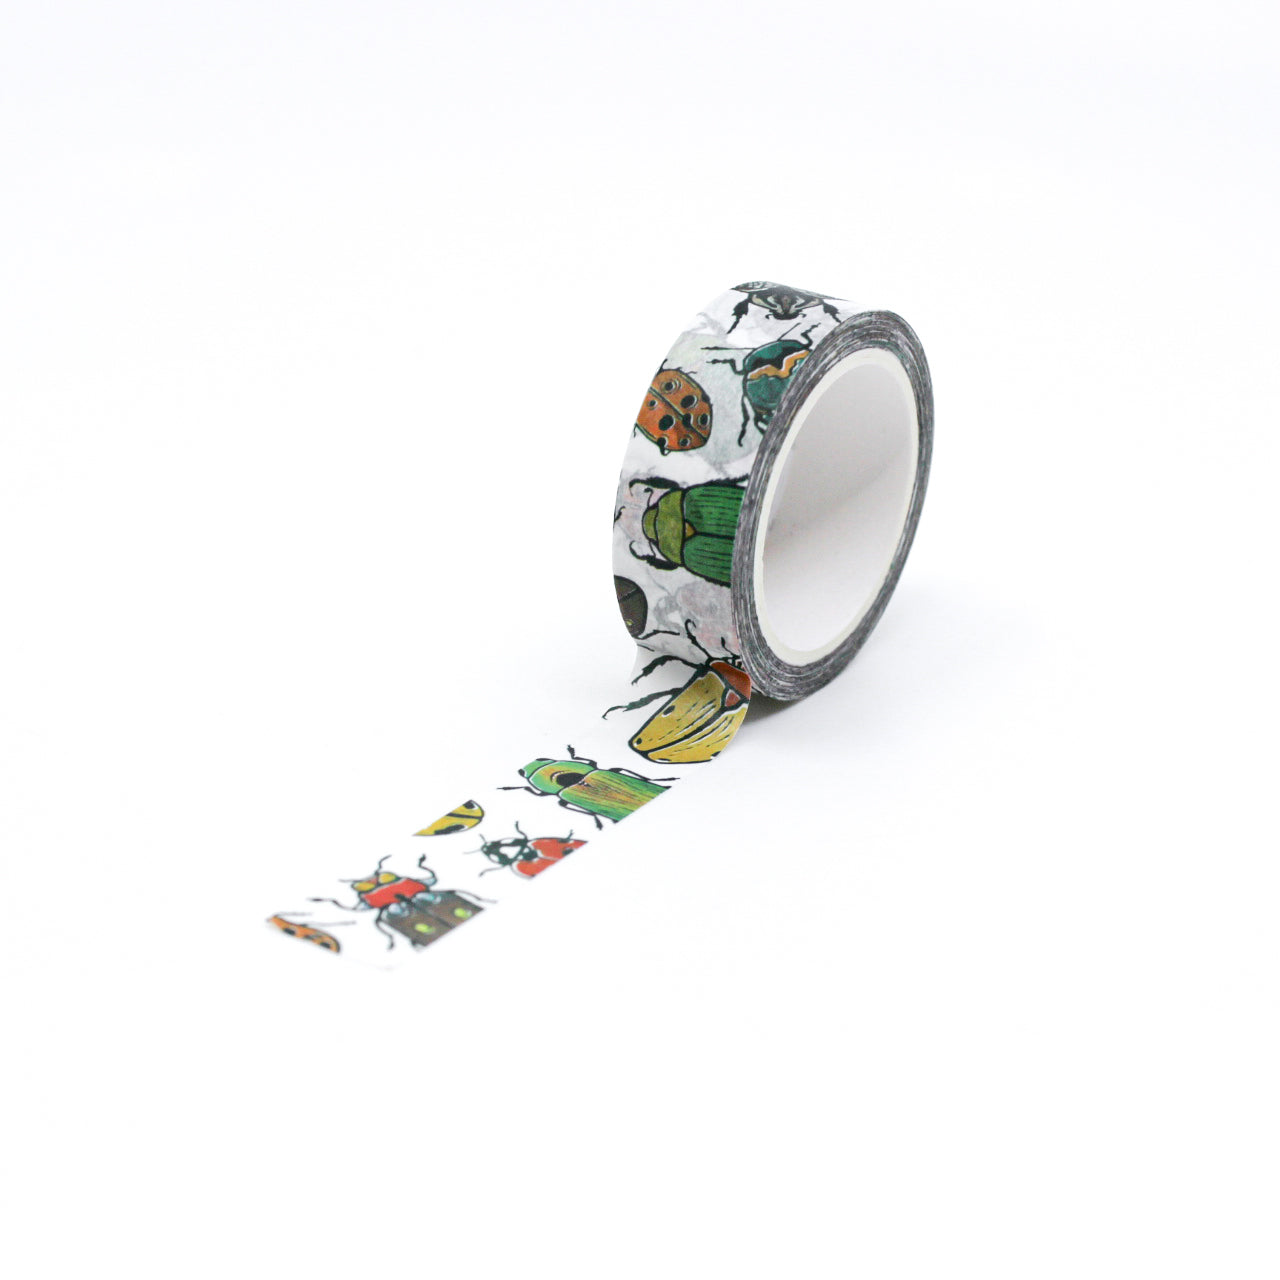 Beautiful Beetles Washi Tape, featuring intricate beetle illustrations, a stunning addition to your crafting supplies. This tape is from Root & Branch Paper Co. and sold at BBB Supplies Craft Shop.